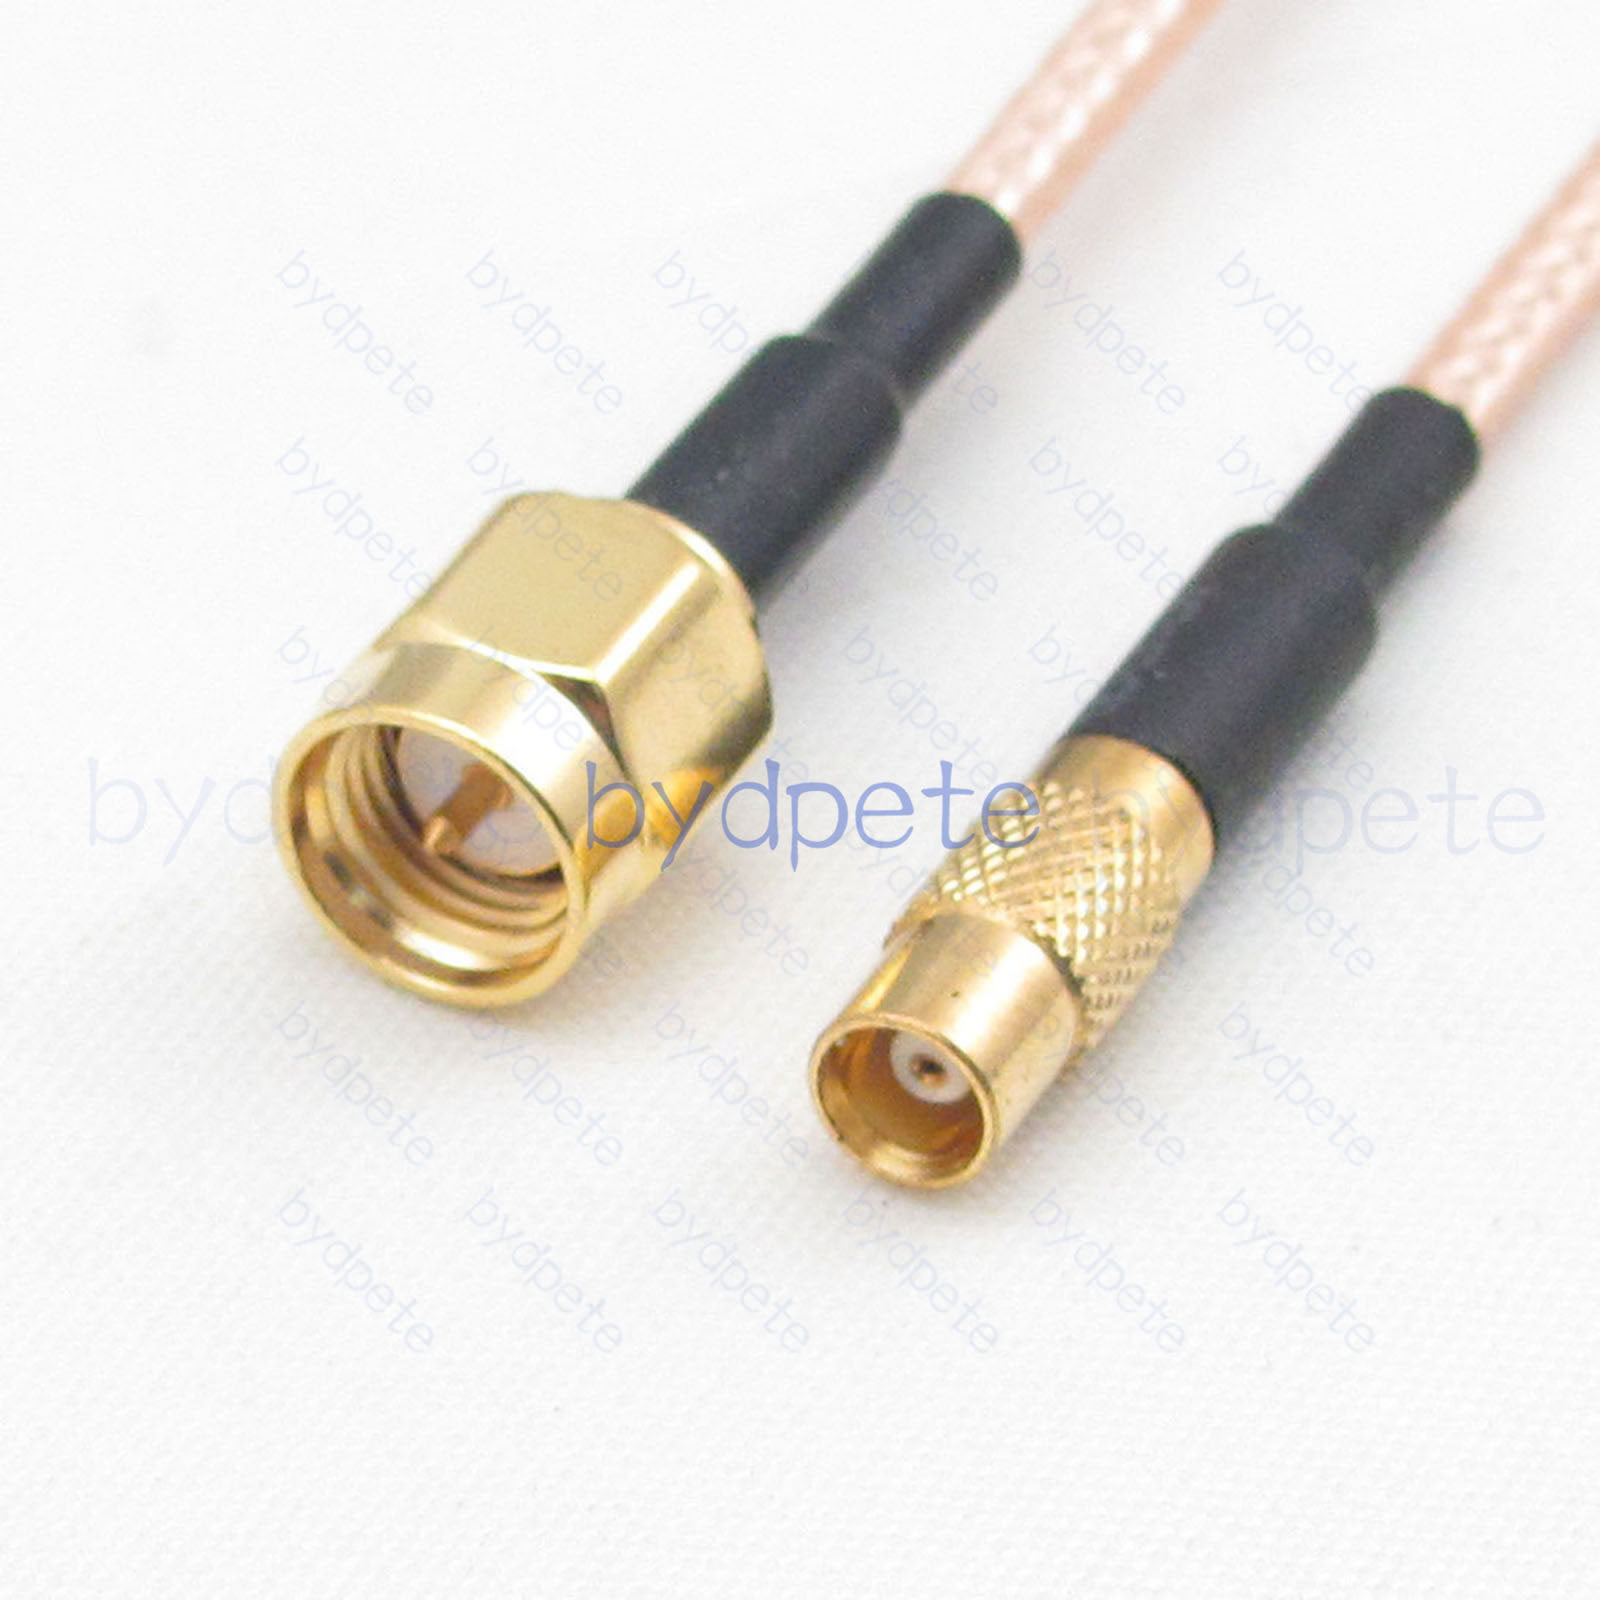 MCX female to SMA male plug RG-316 RG316 cable coaxial pigtail coax kable 50ohm BYDC215MCX316 MCX-SMA